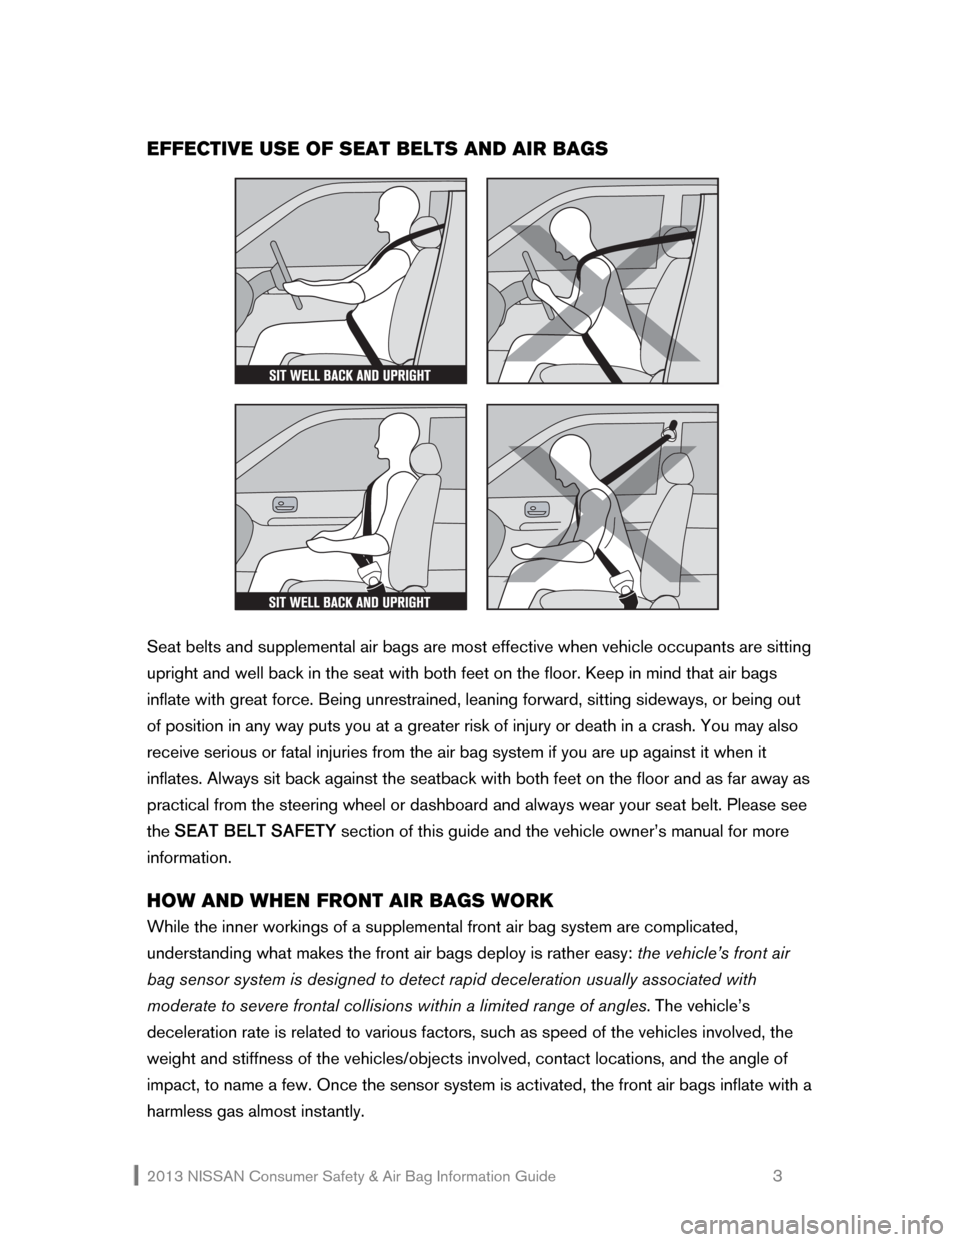 NISSAN TITAN 2013 1.G Consumer Safety Air Bag Information Guide 2013 NISSAN Consumer Safety & Air Bag Information Guide                                                   3 
EFFECTIVE USE OF SEAT BELTS AND AIR BAGS 
 
 
 
Seat belts and supplemental air bags are mo